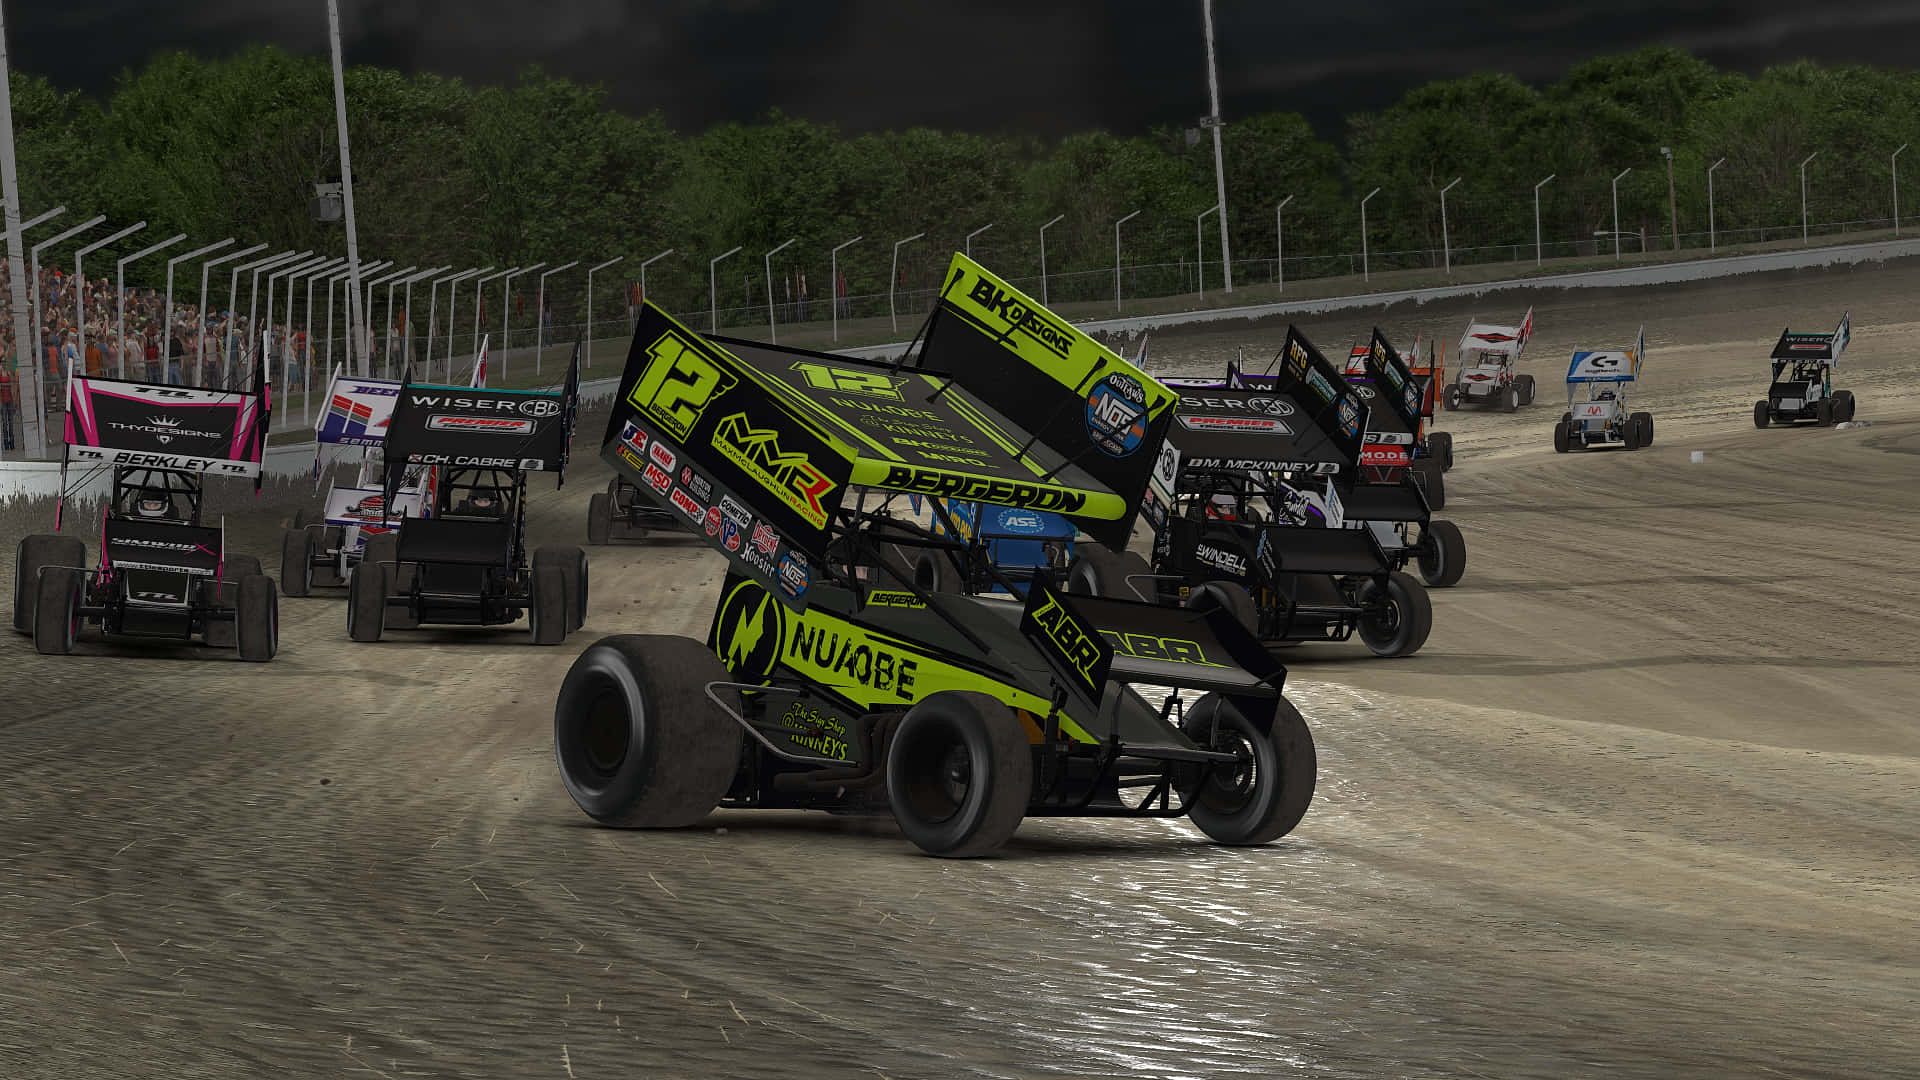 A Race Of Dirt Cars On A Dirt Track Wallpaper